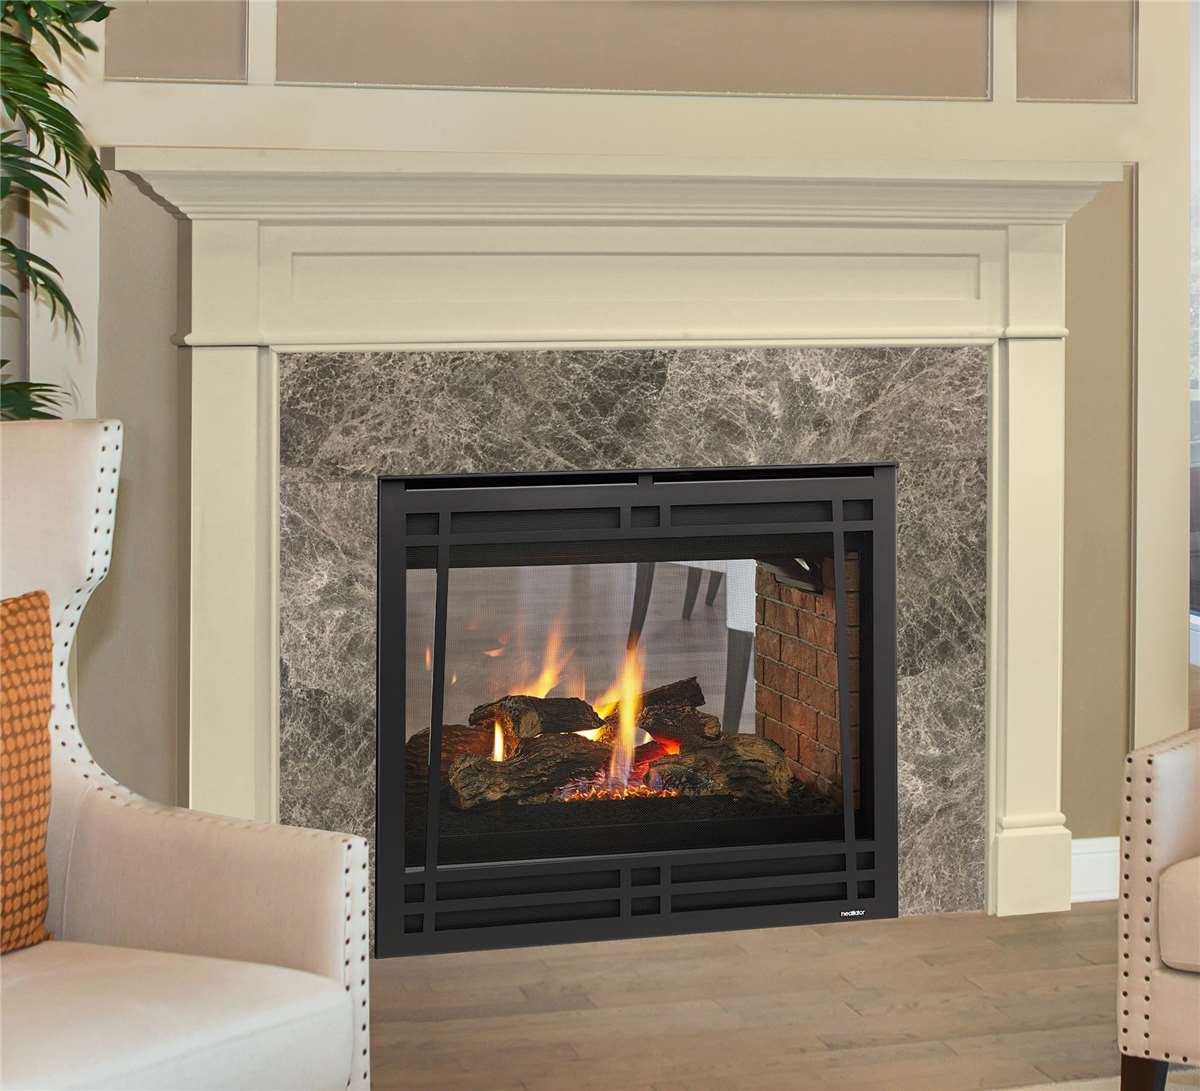 Heatilator See-Through direct vent gas fireplace with Craftsman front.